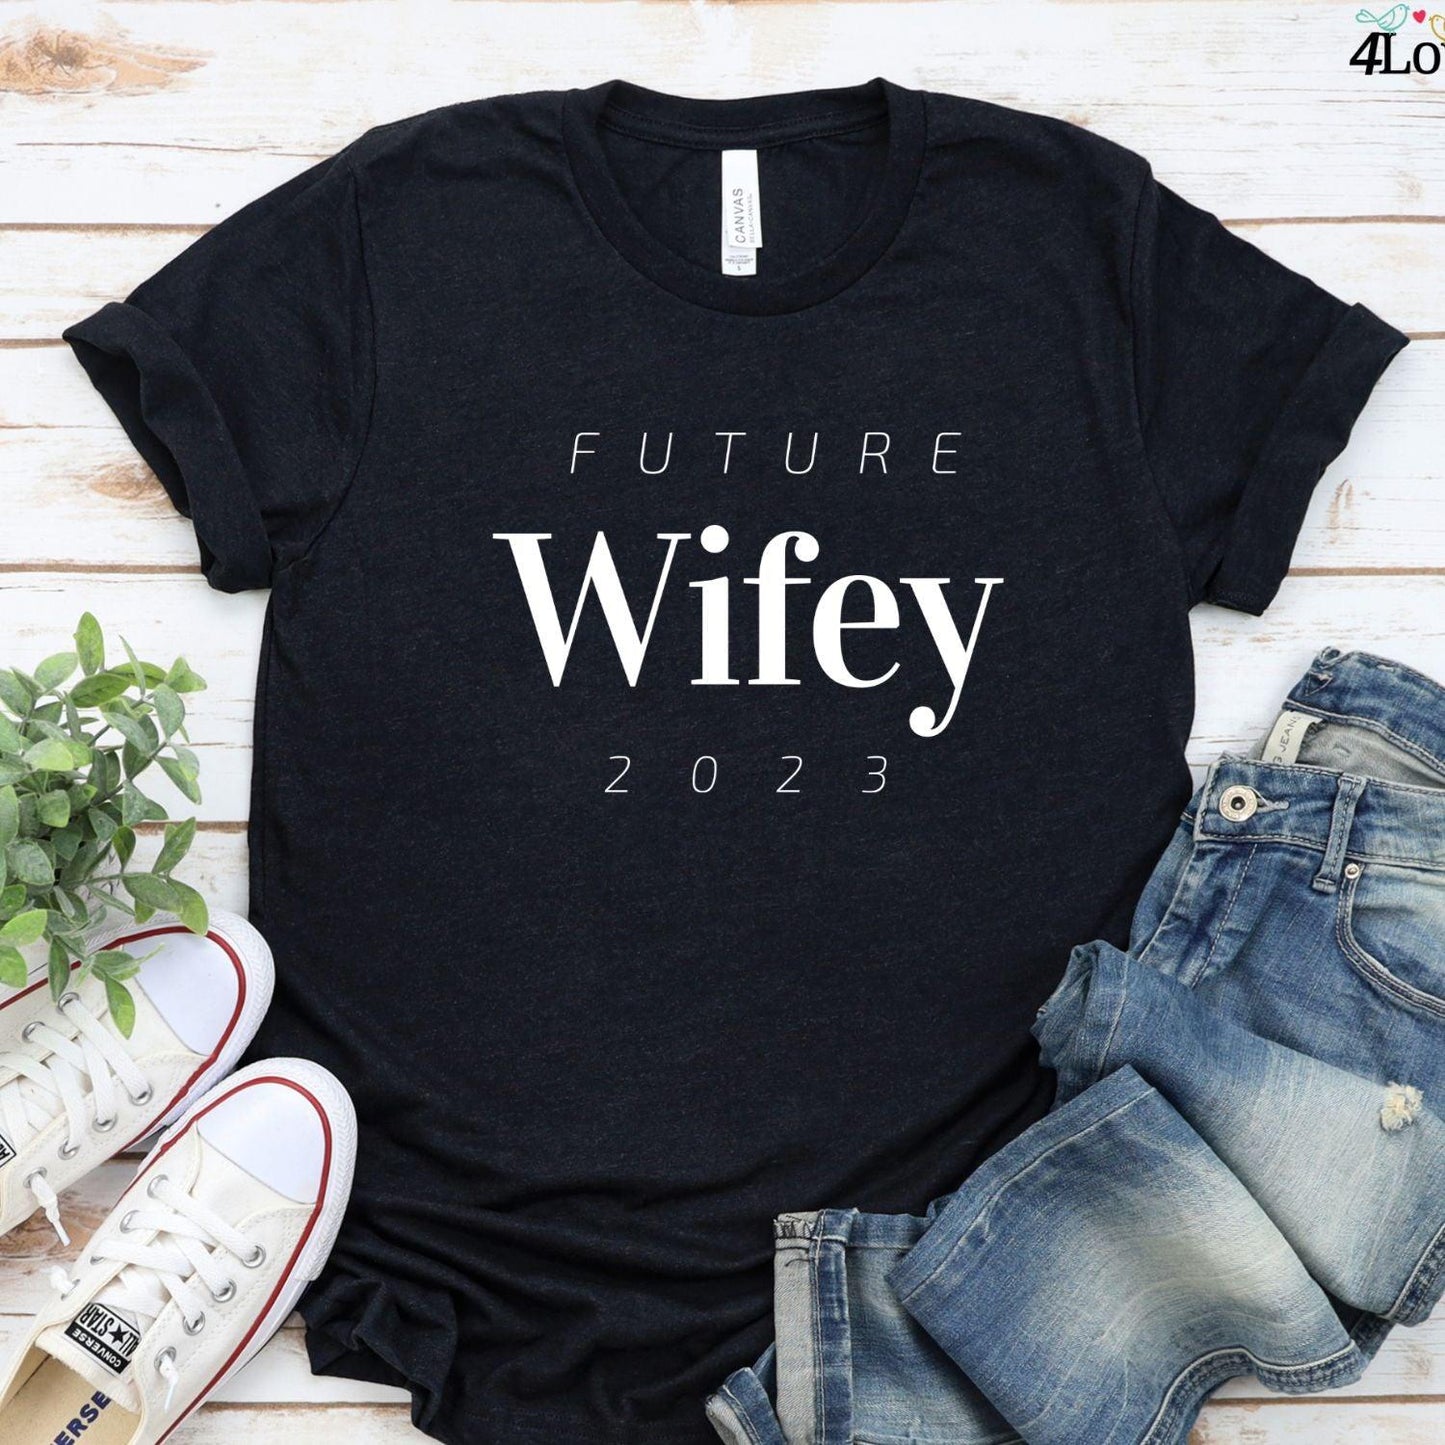 Personalized Future Hubby & Wifey Matching Outfits | Custom Fiancé & Fiancée Set with Year - 4Lovebirds